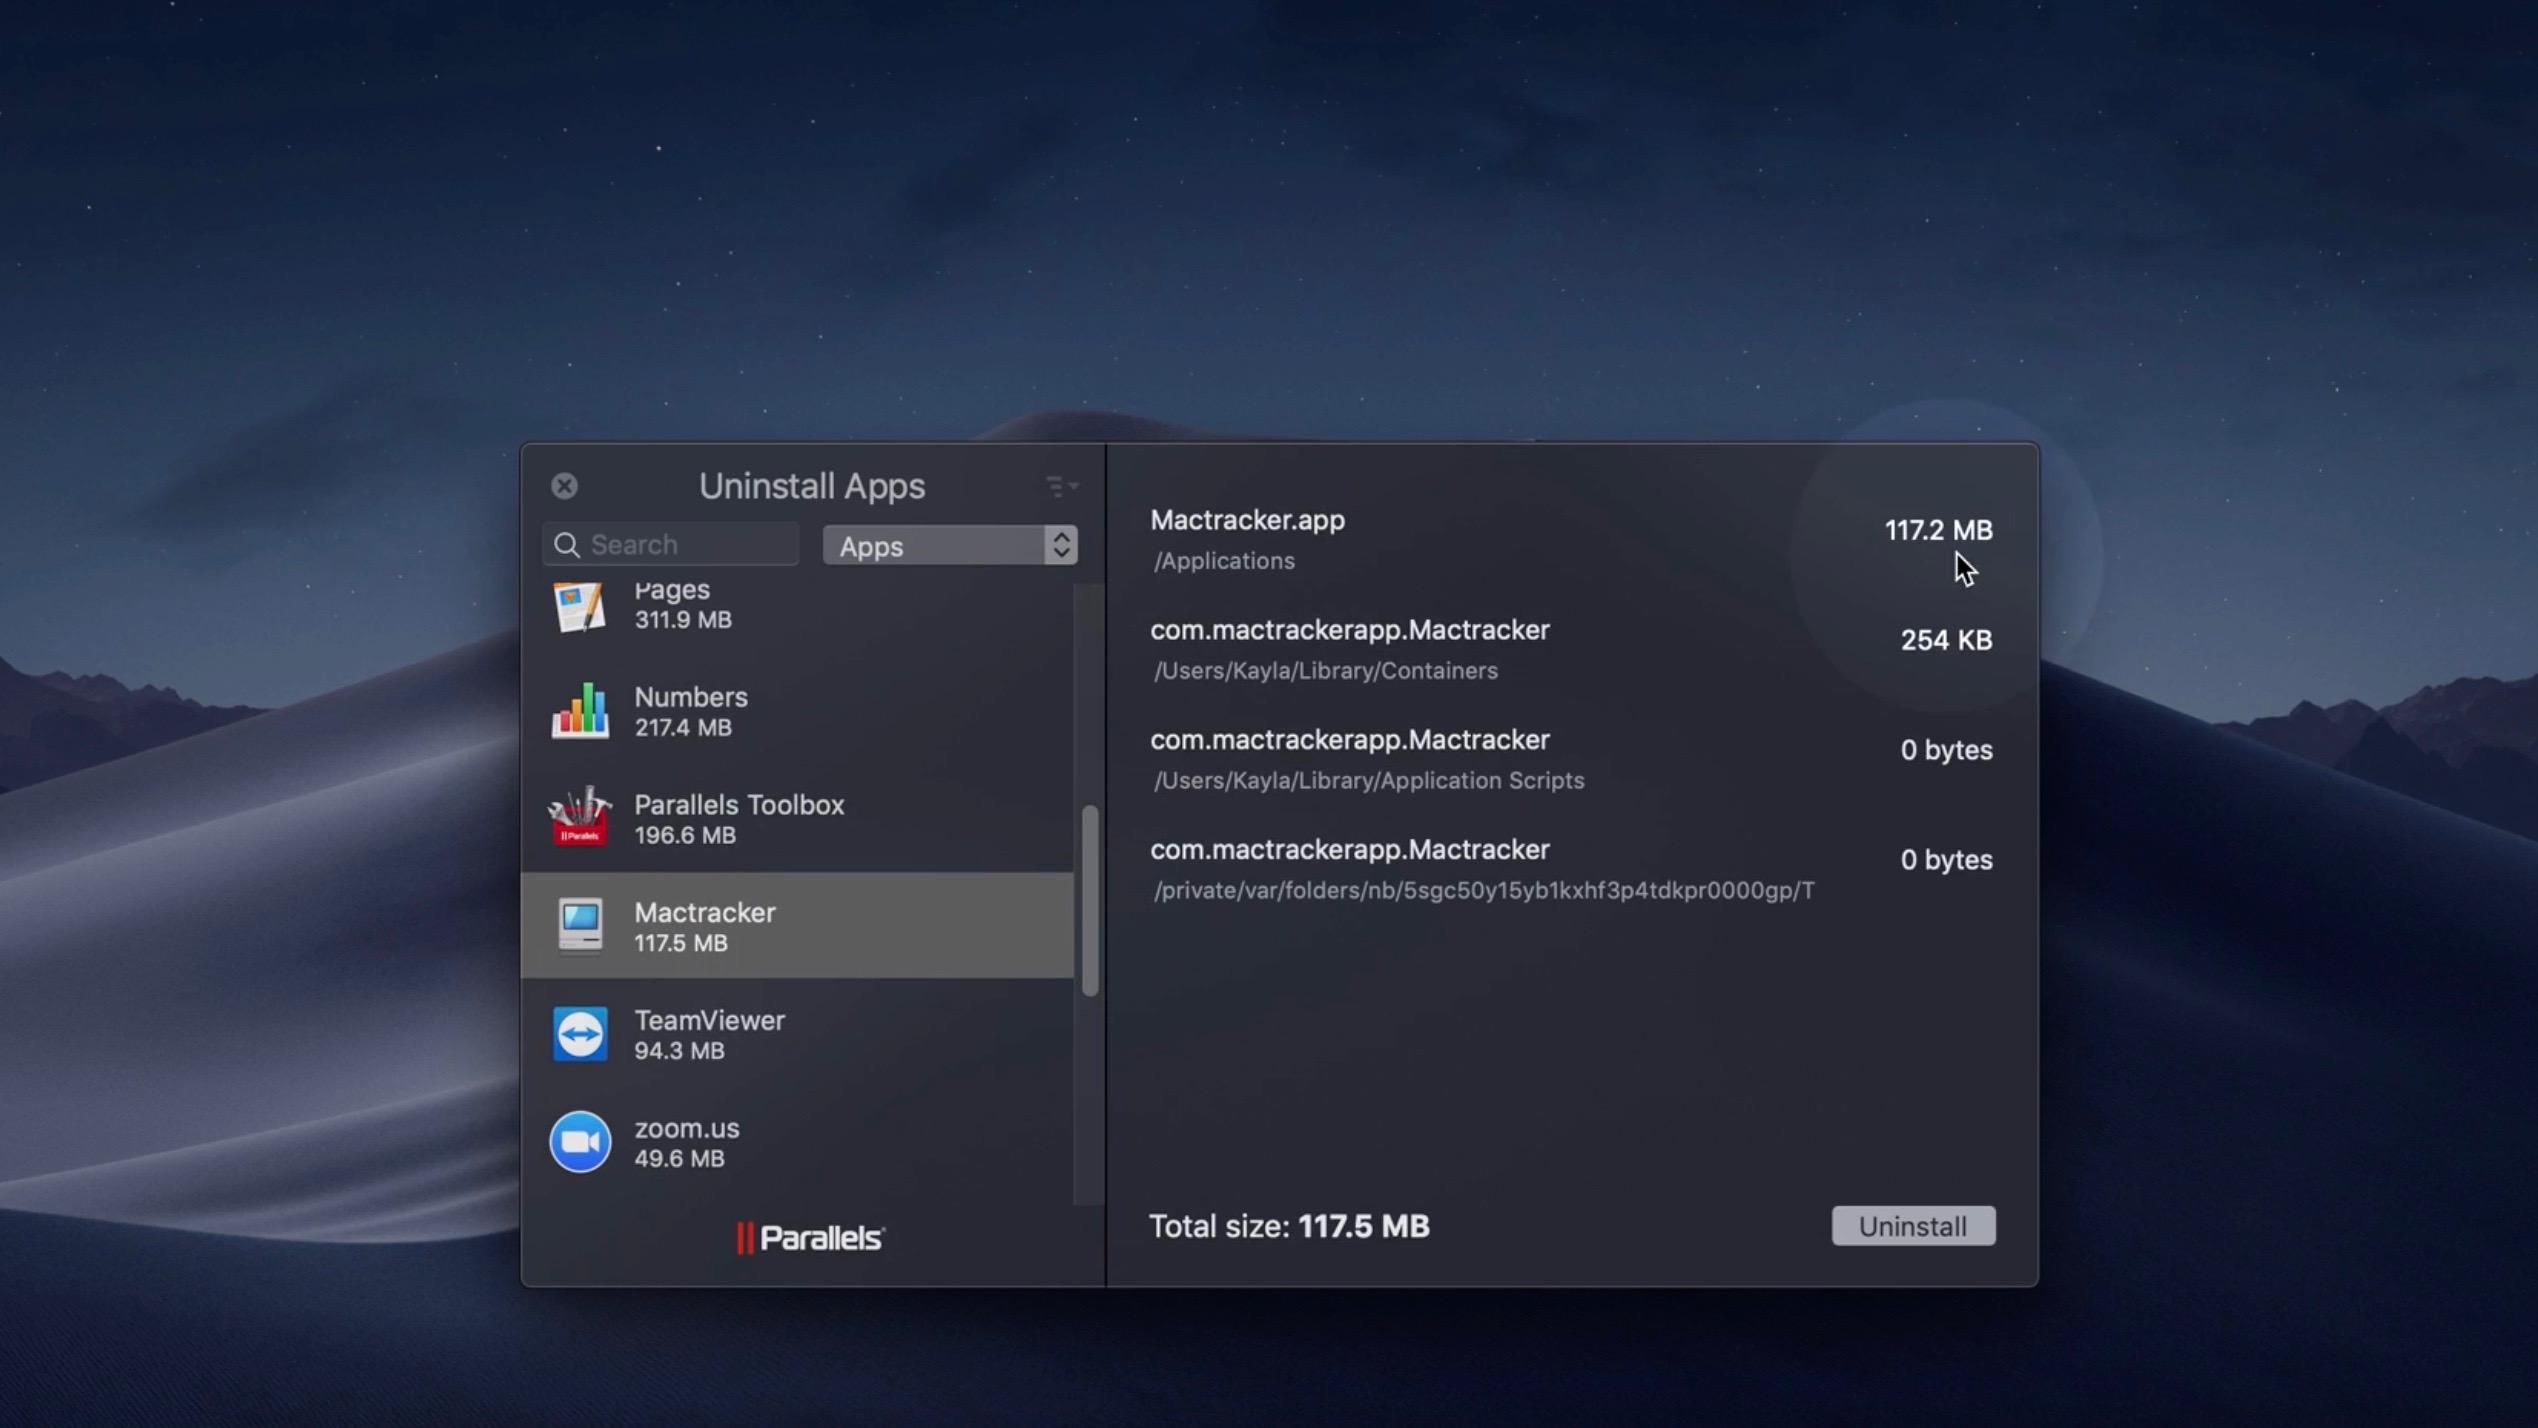 uninstall parallels toolbox